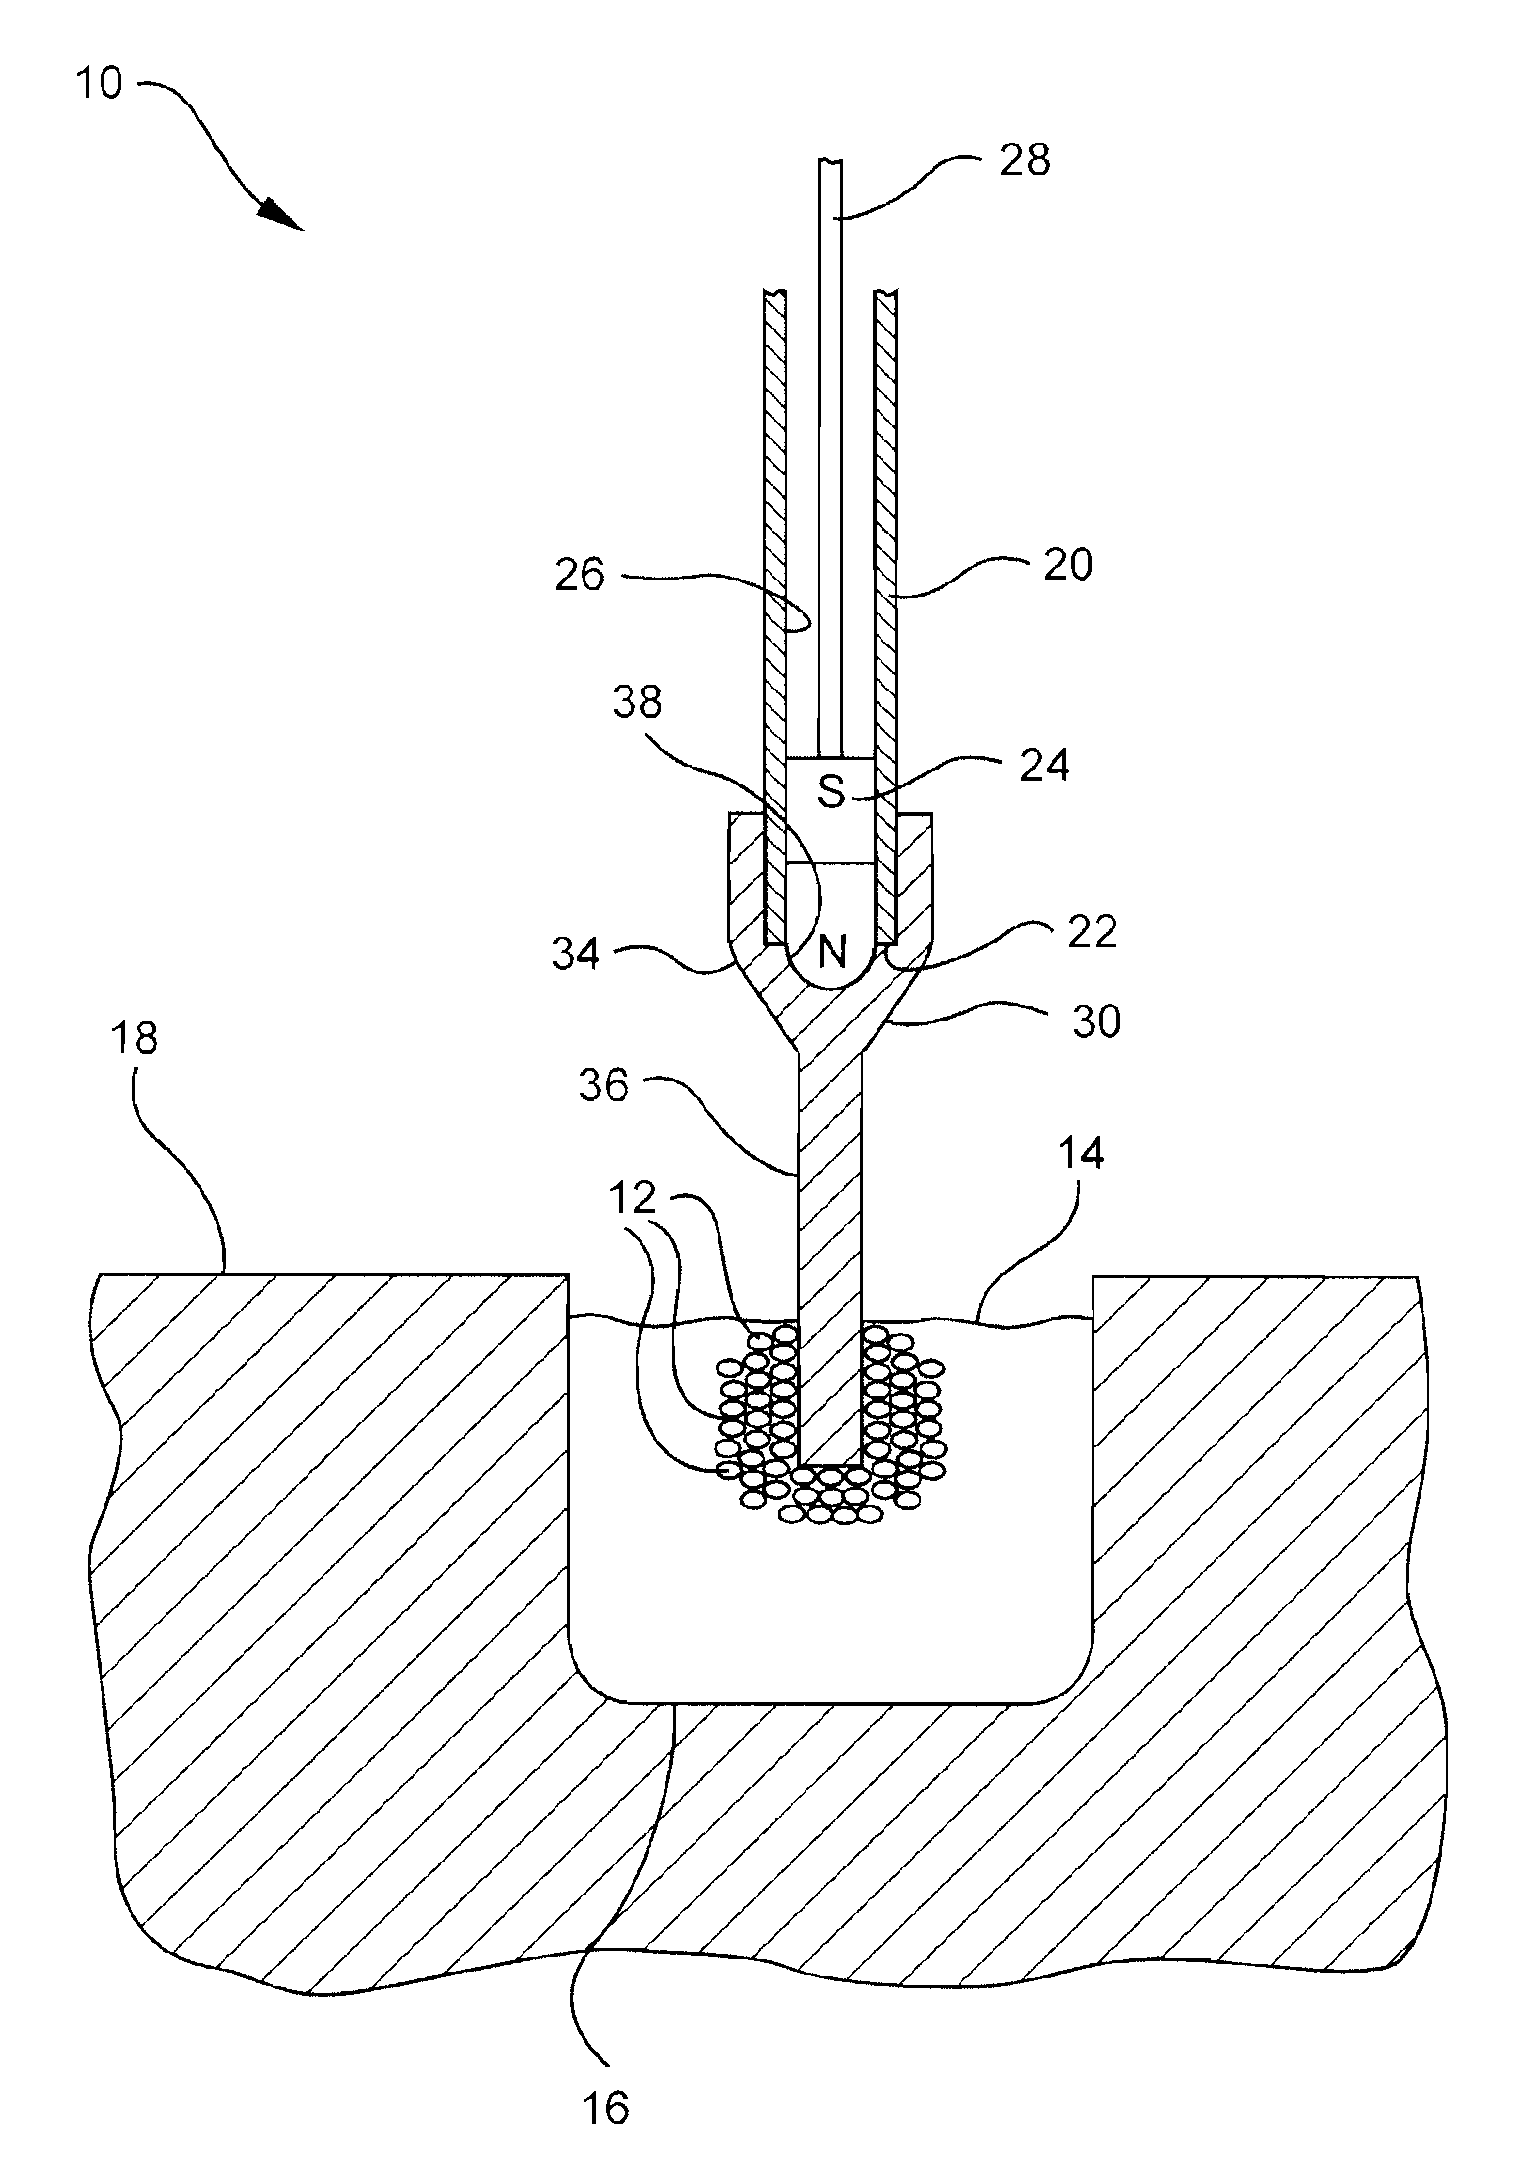 Flux Concentrator for Biomagnetic Particle Transfer Device